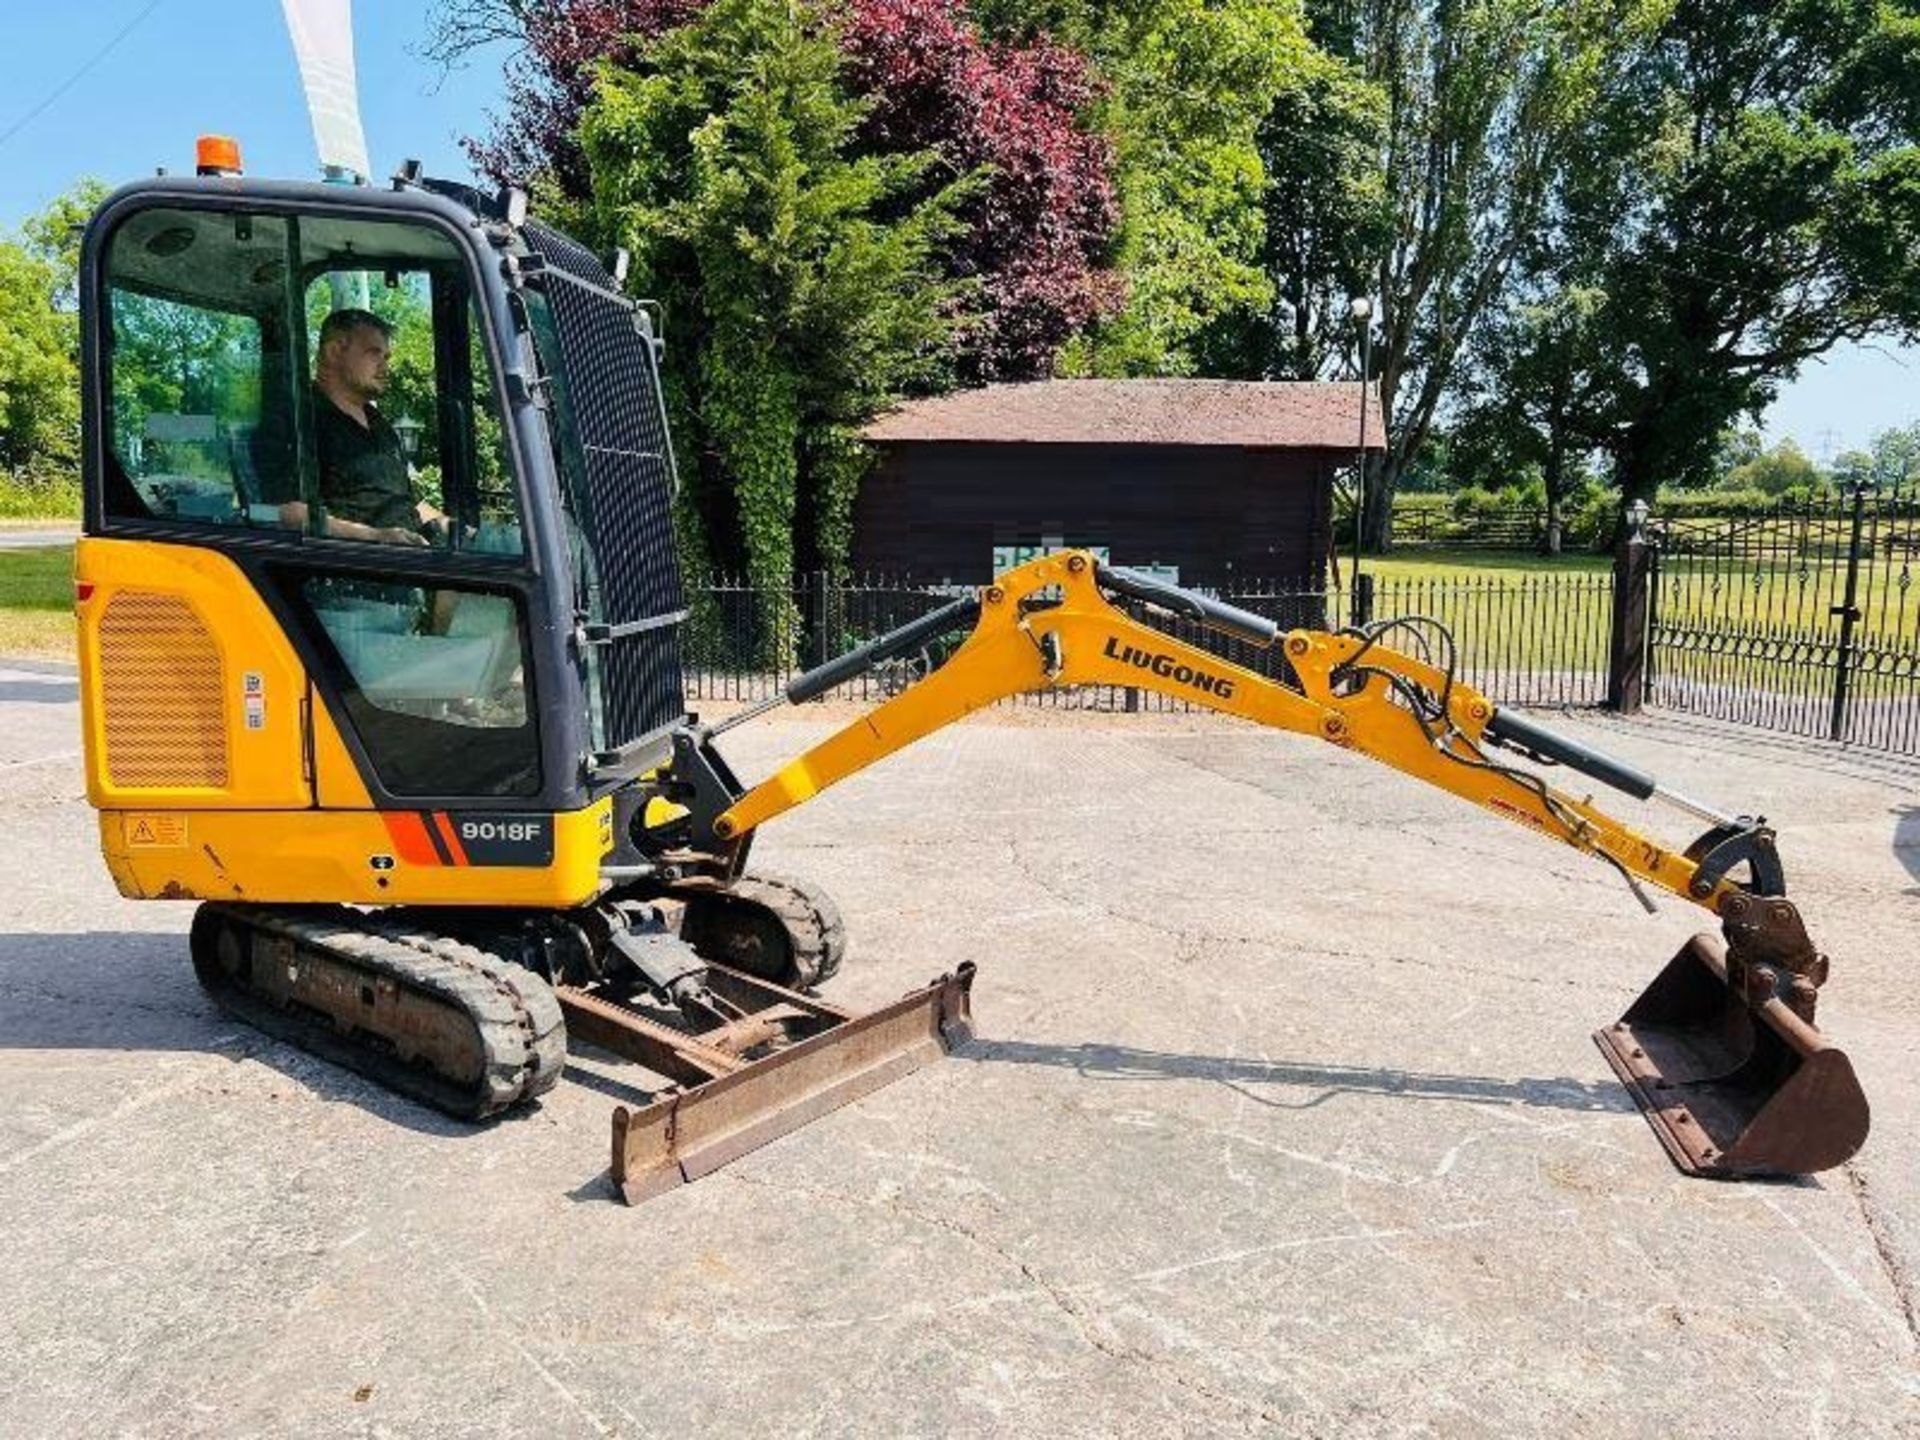 LIUGONG 9018F EXCAVATOR *YEAR 2020, 543 HOURS, ONE OWNER FROM NEW - Image 8 of 16